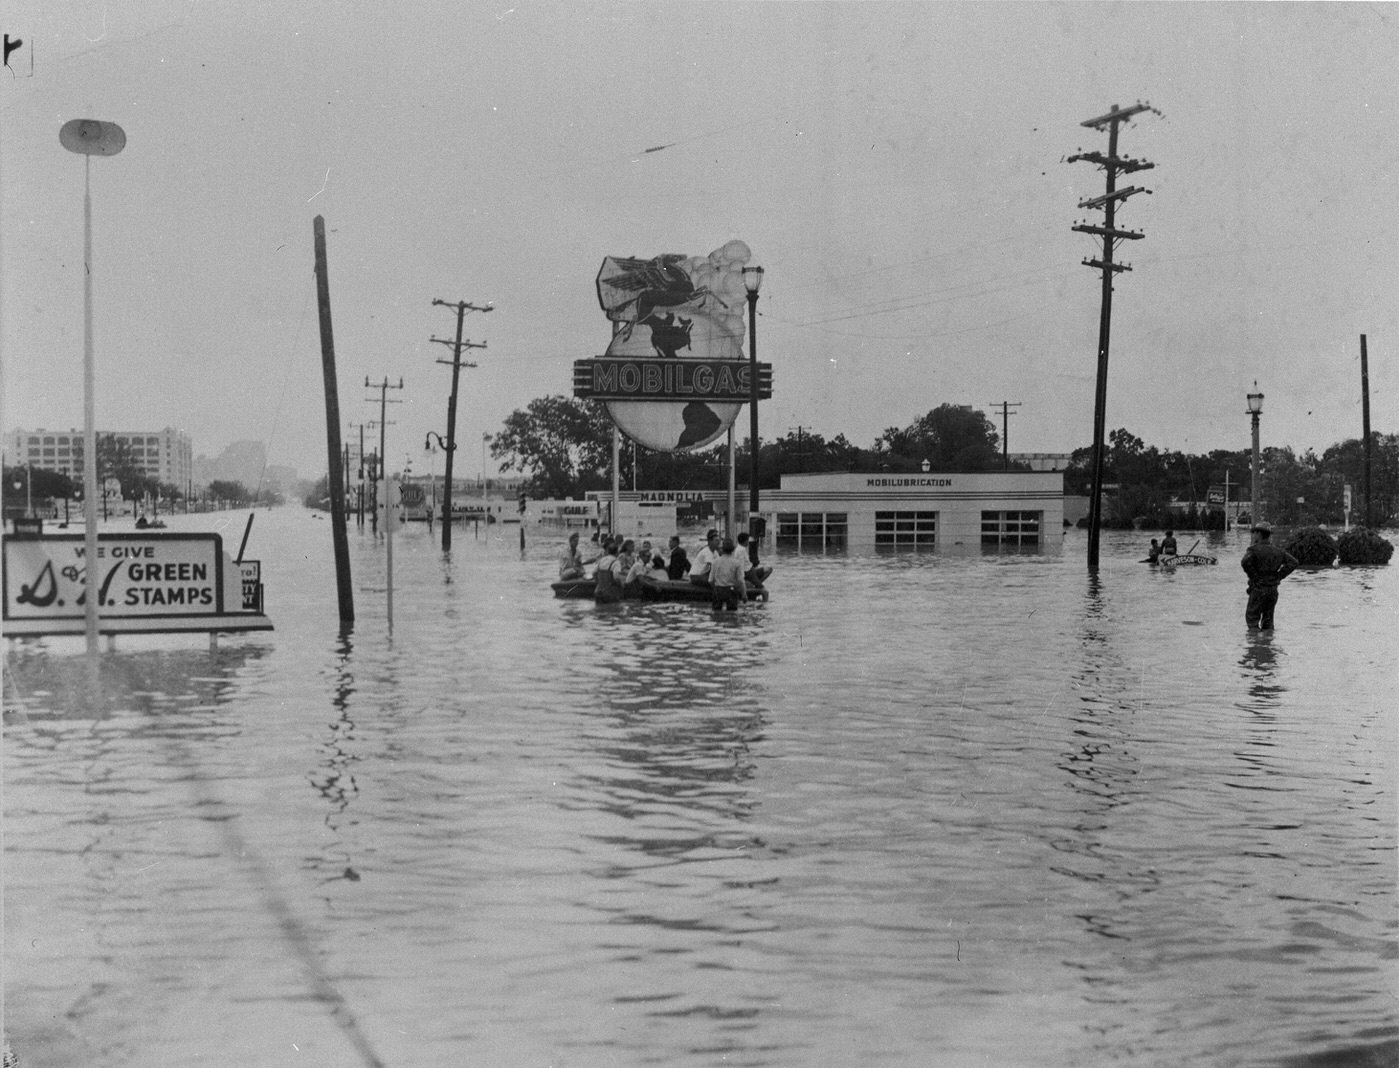 Flooded street, Green Stamps sign and Mobil Gas station, 7th St., University Dr., Camp Bowie intersection, Fort Worth, 1949